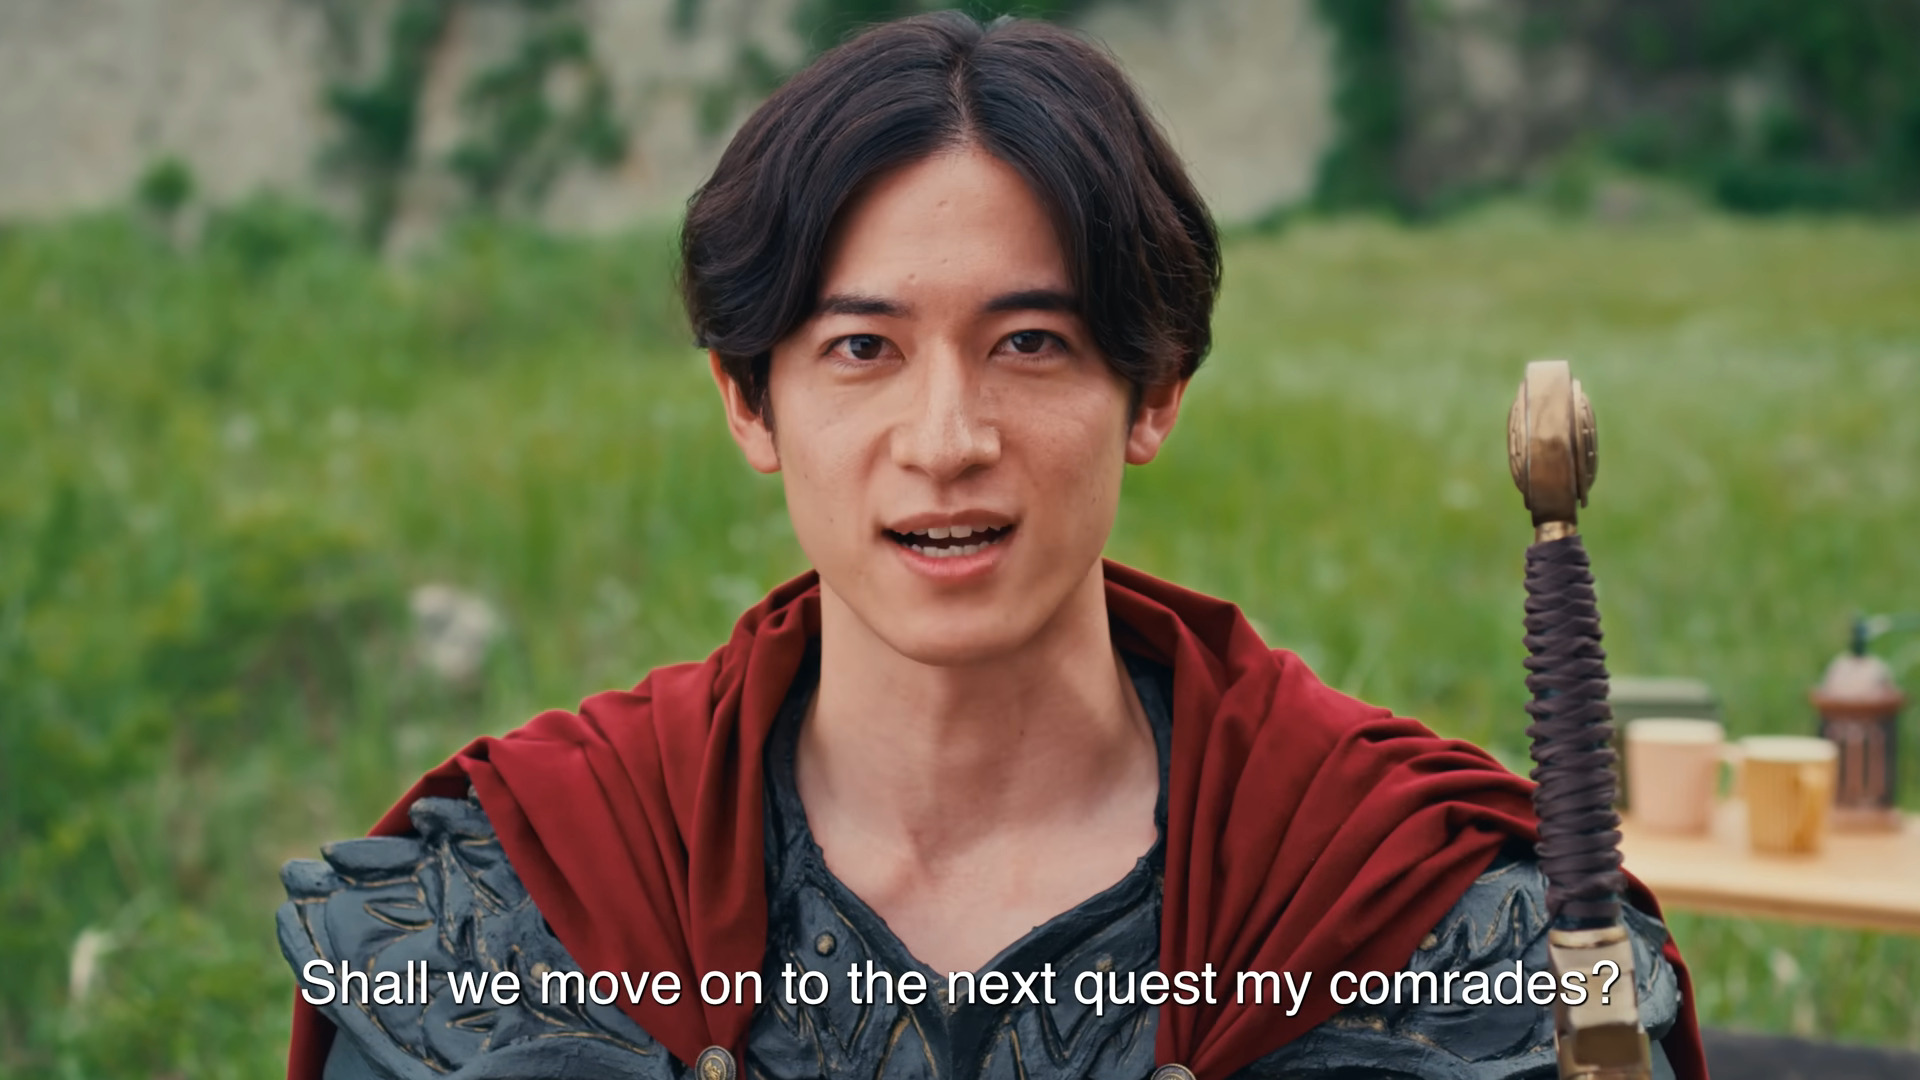 An adventurer looks forward to the next adventure in a Japanese Dungeons & Dragon commercial presented during Wizards Presents 2022 - Dungeons & Dragons | Magic: The Gathering via D&D Beyond YouTube